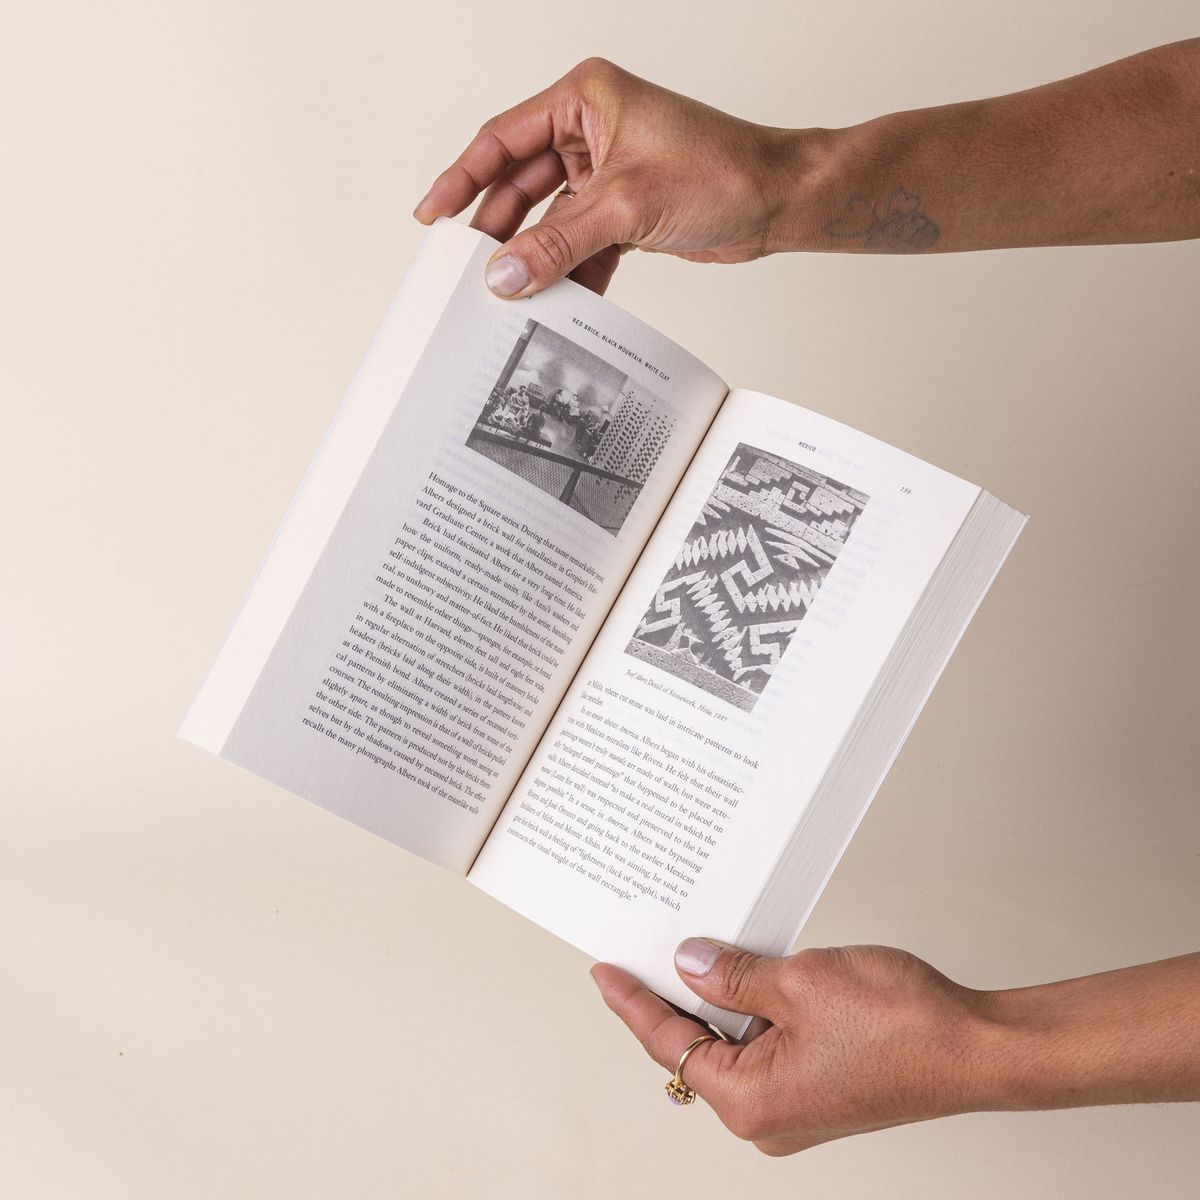 Hands open a paperback book with plain text and black and white photos